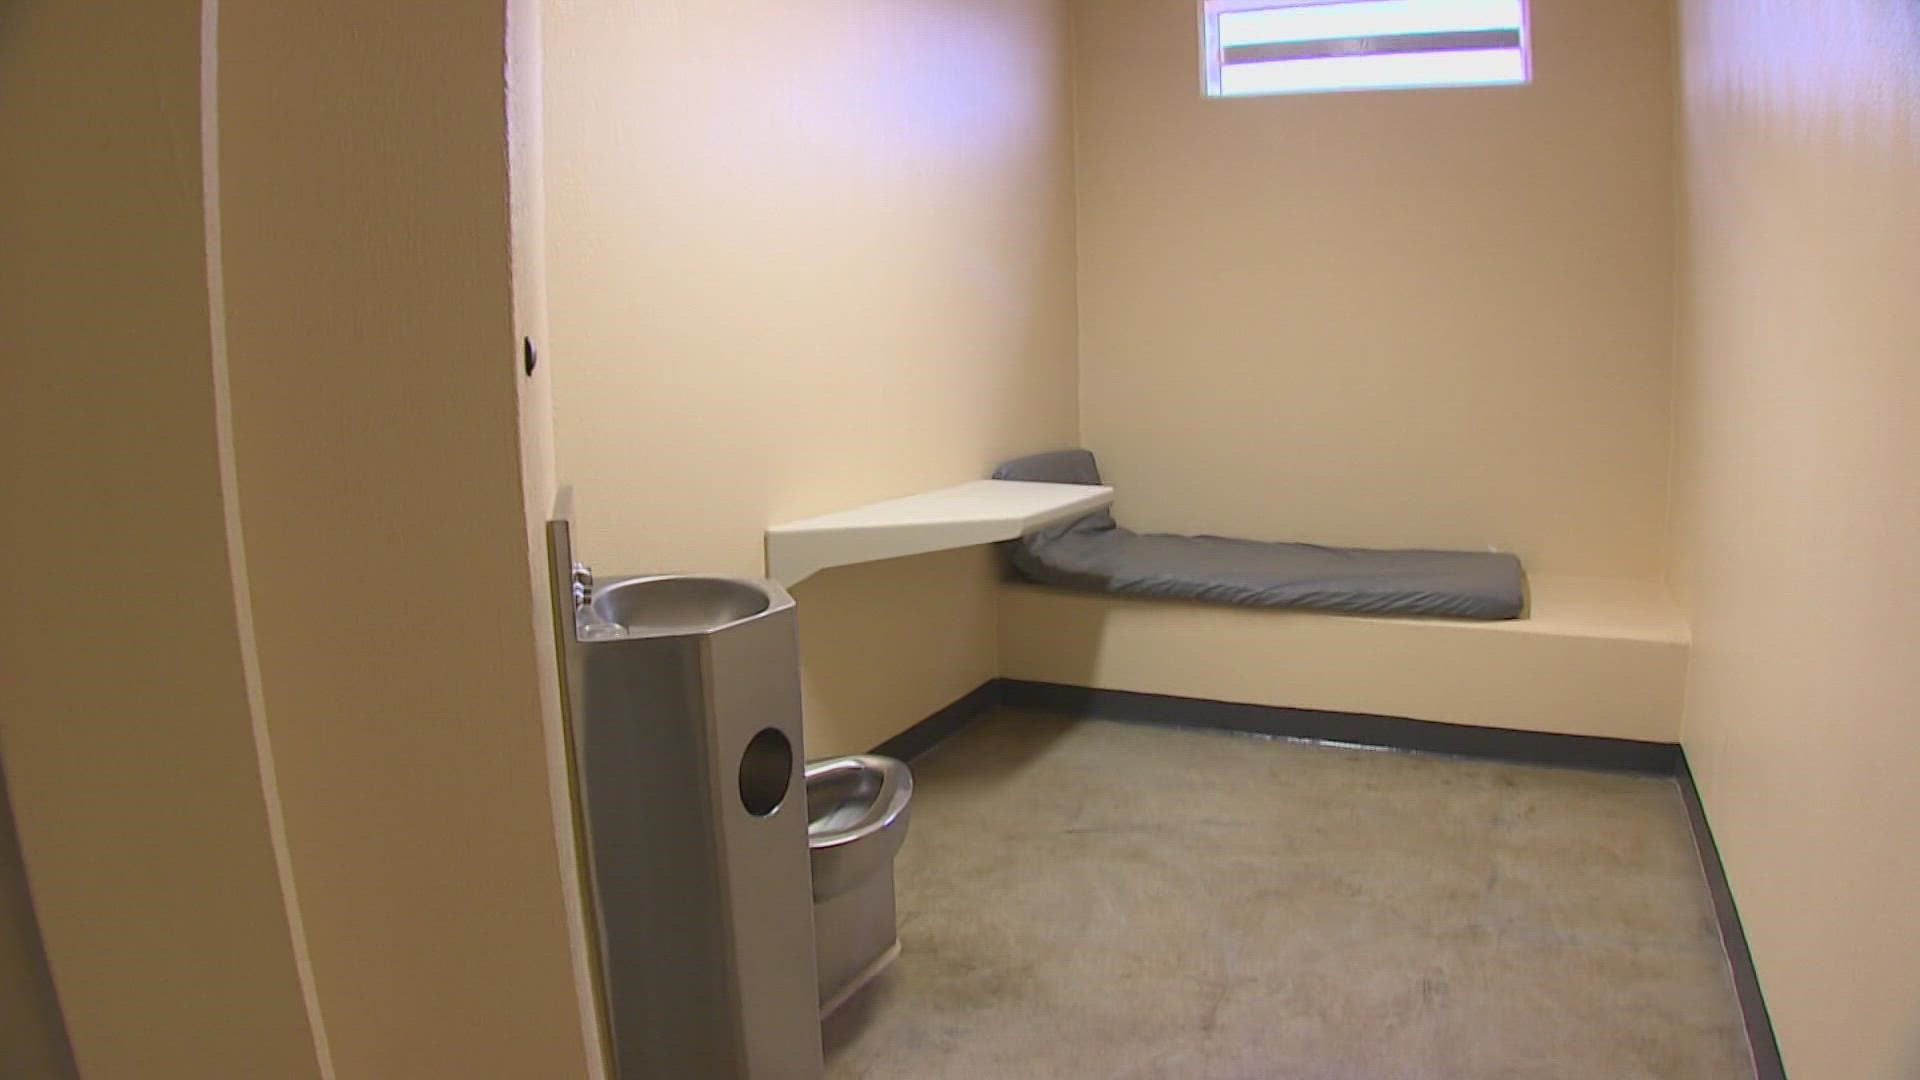 Currently, the state Department of Corrections said just under 600 inmates are in solitary confinement.